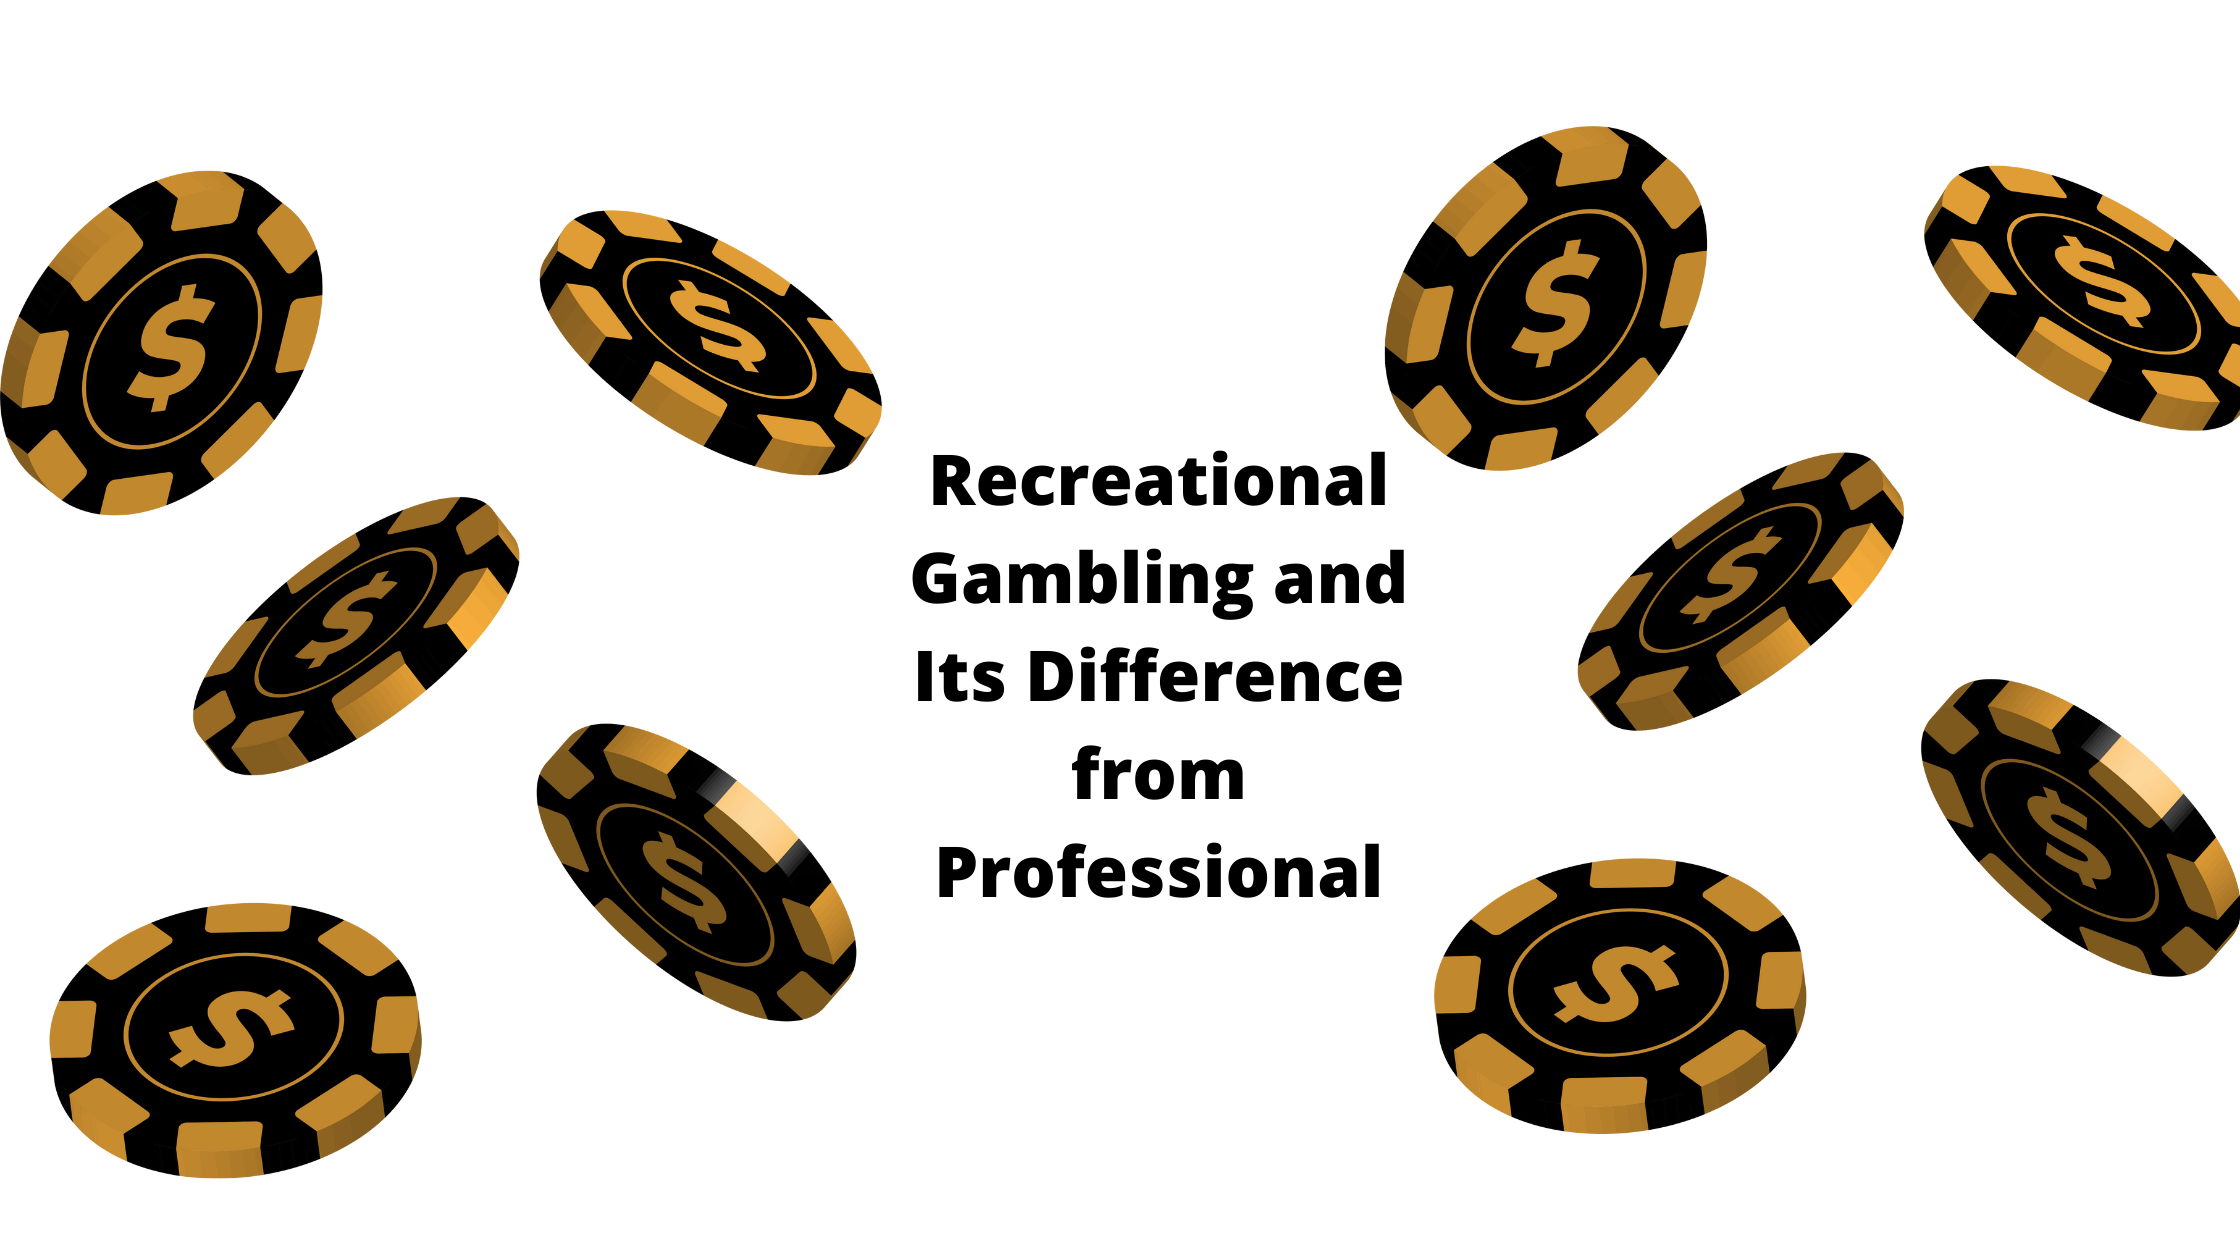 Recreational Gambling and Its Difference from Professional